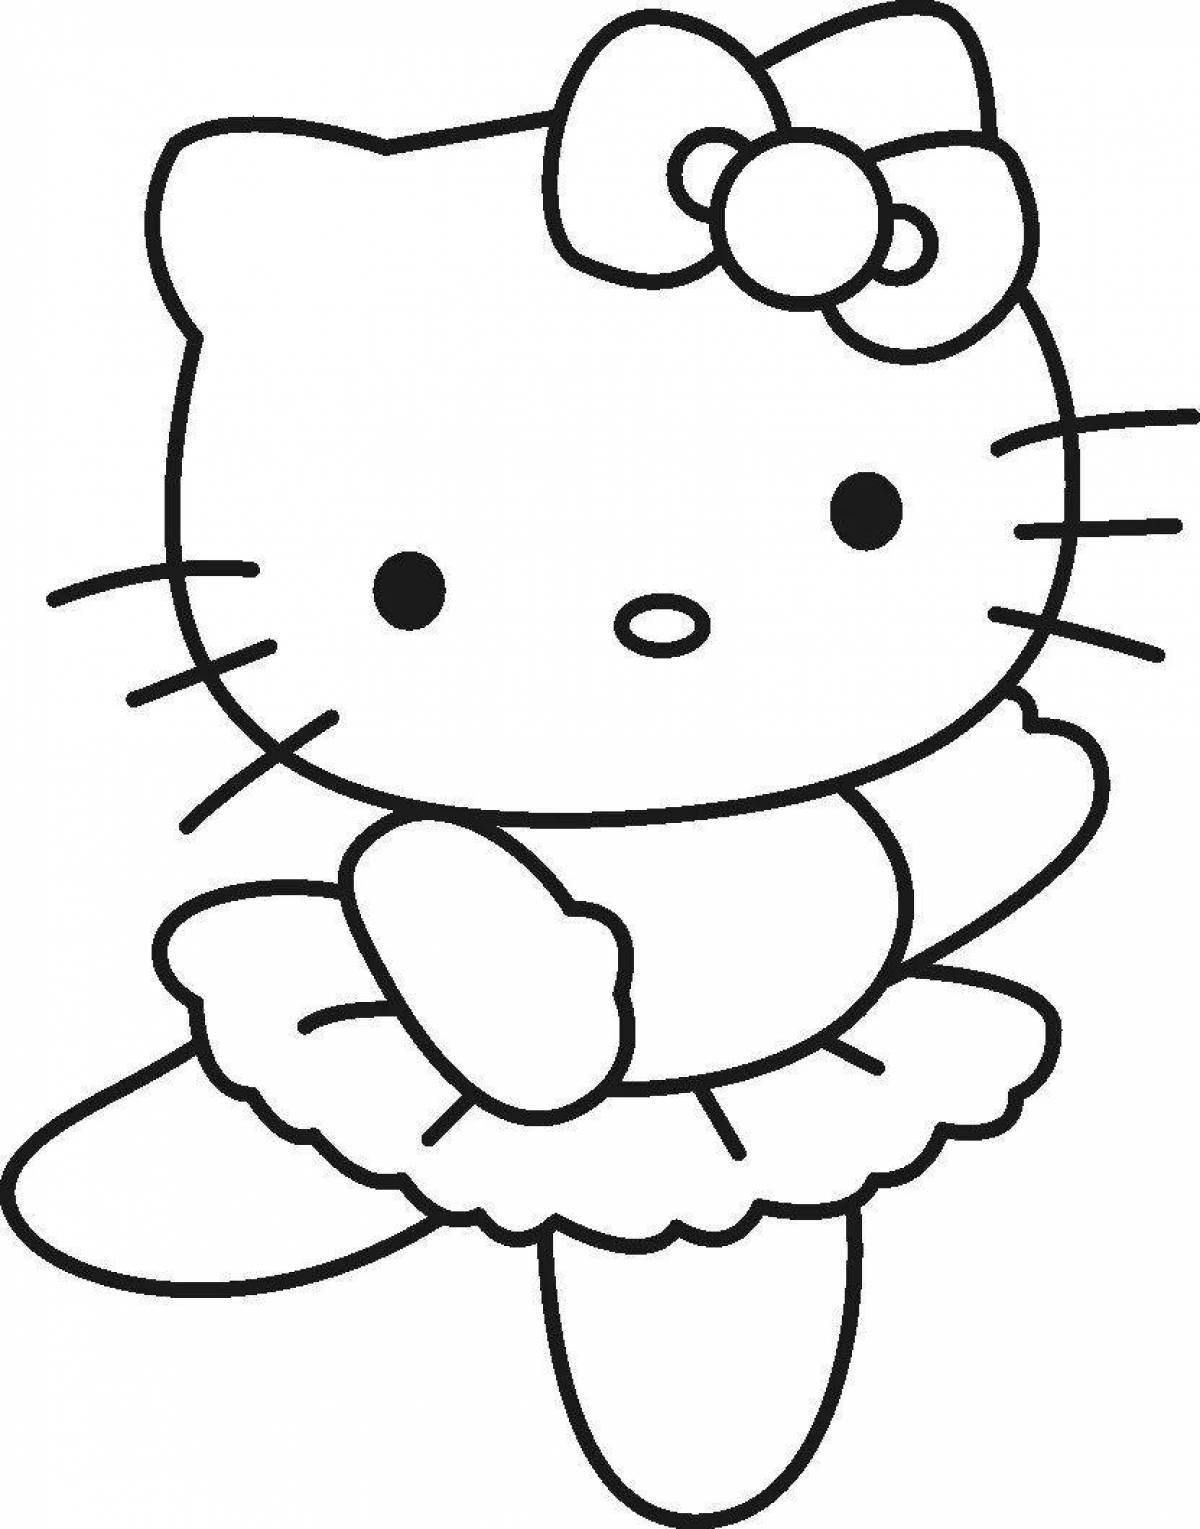 Milady's glowing hello kitty coloring book